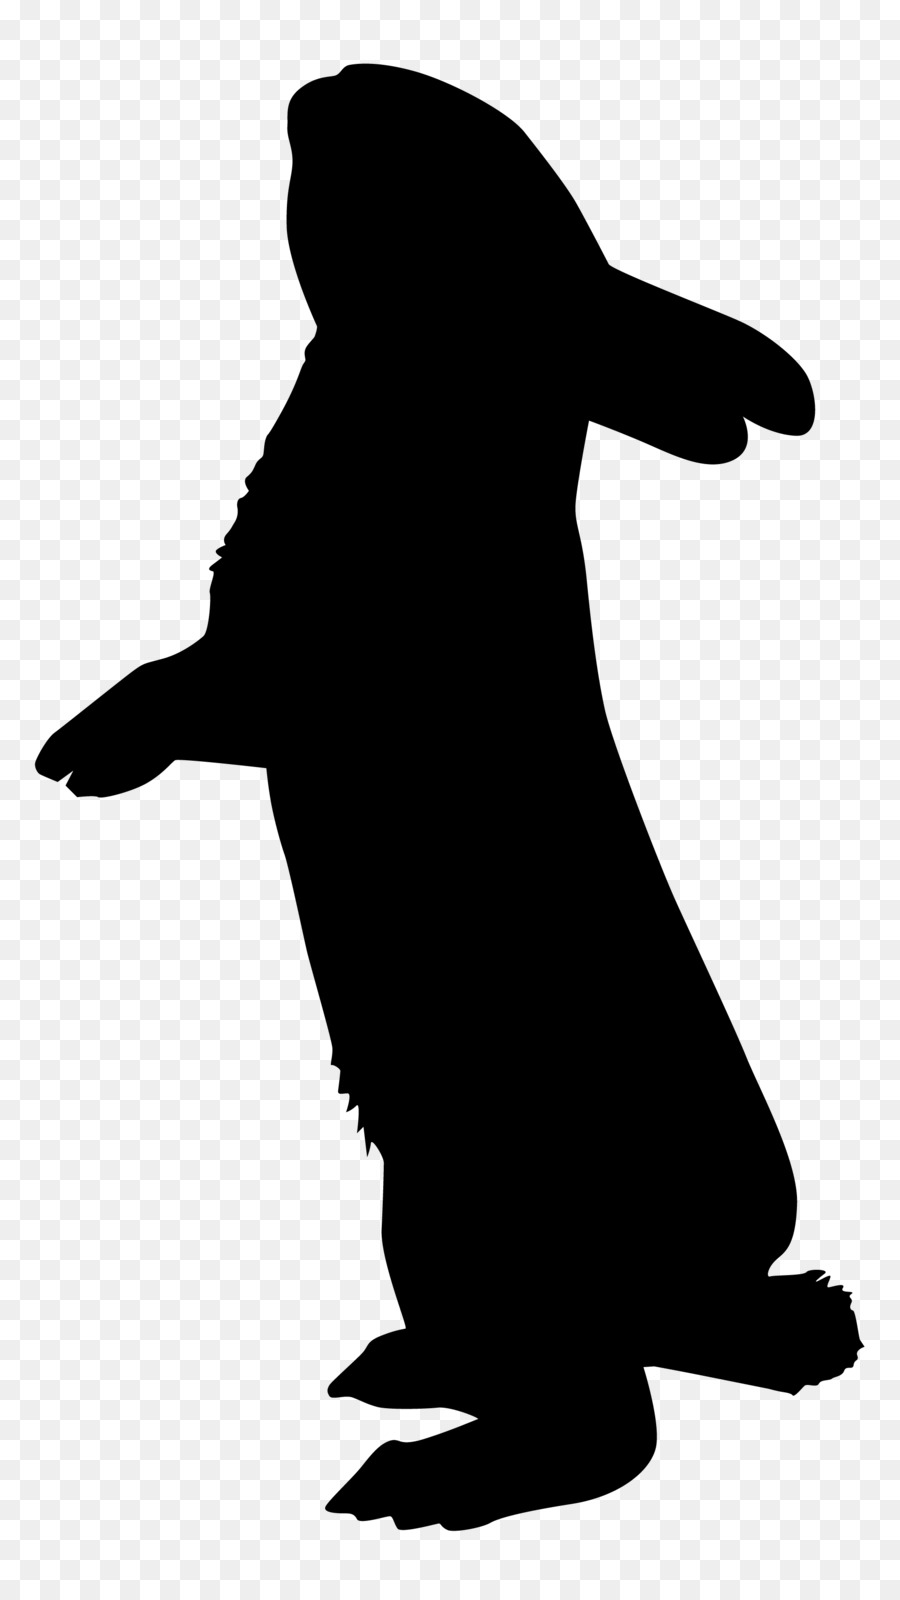 Silhouette Rabbit Photography Clip art - silhouettes png download - 1860*3296 - Free Transparent Silhouette png Download.